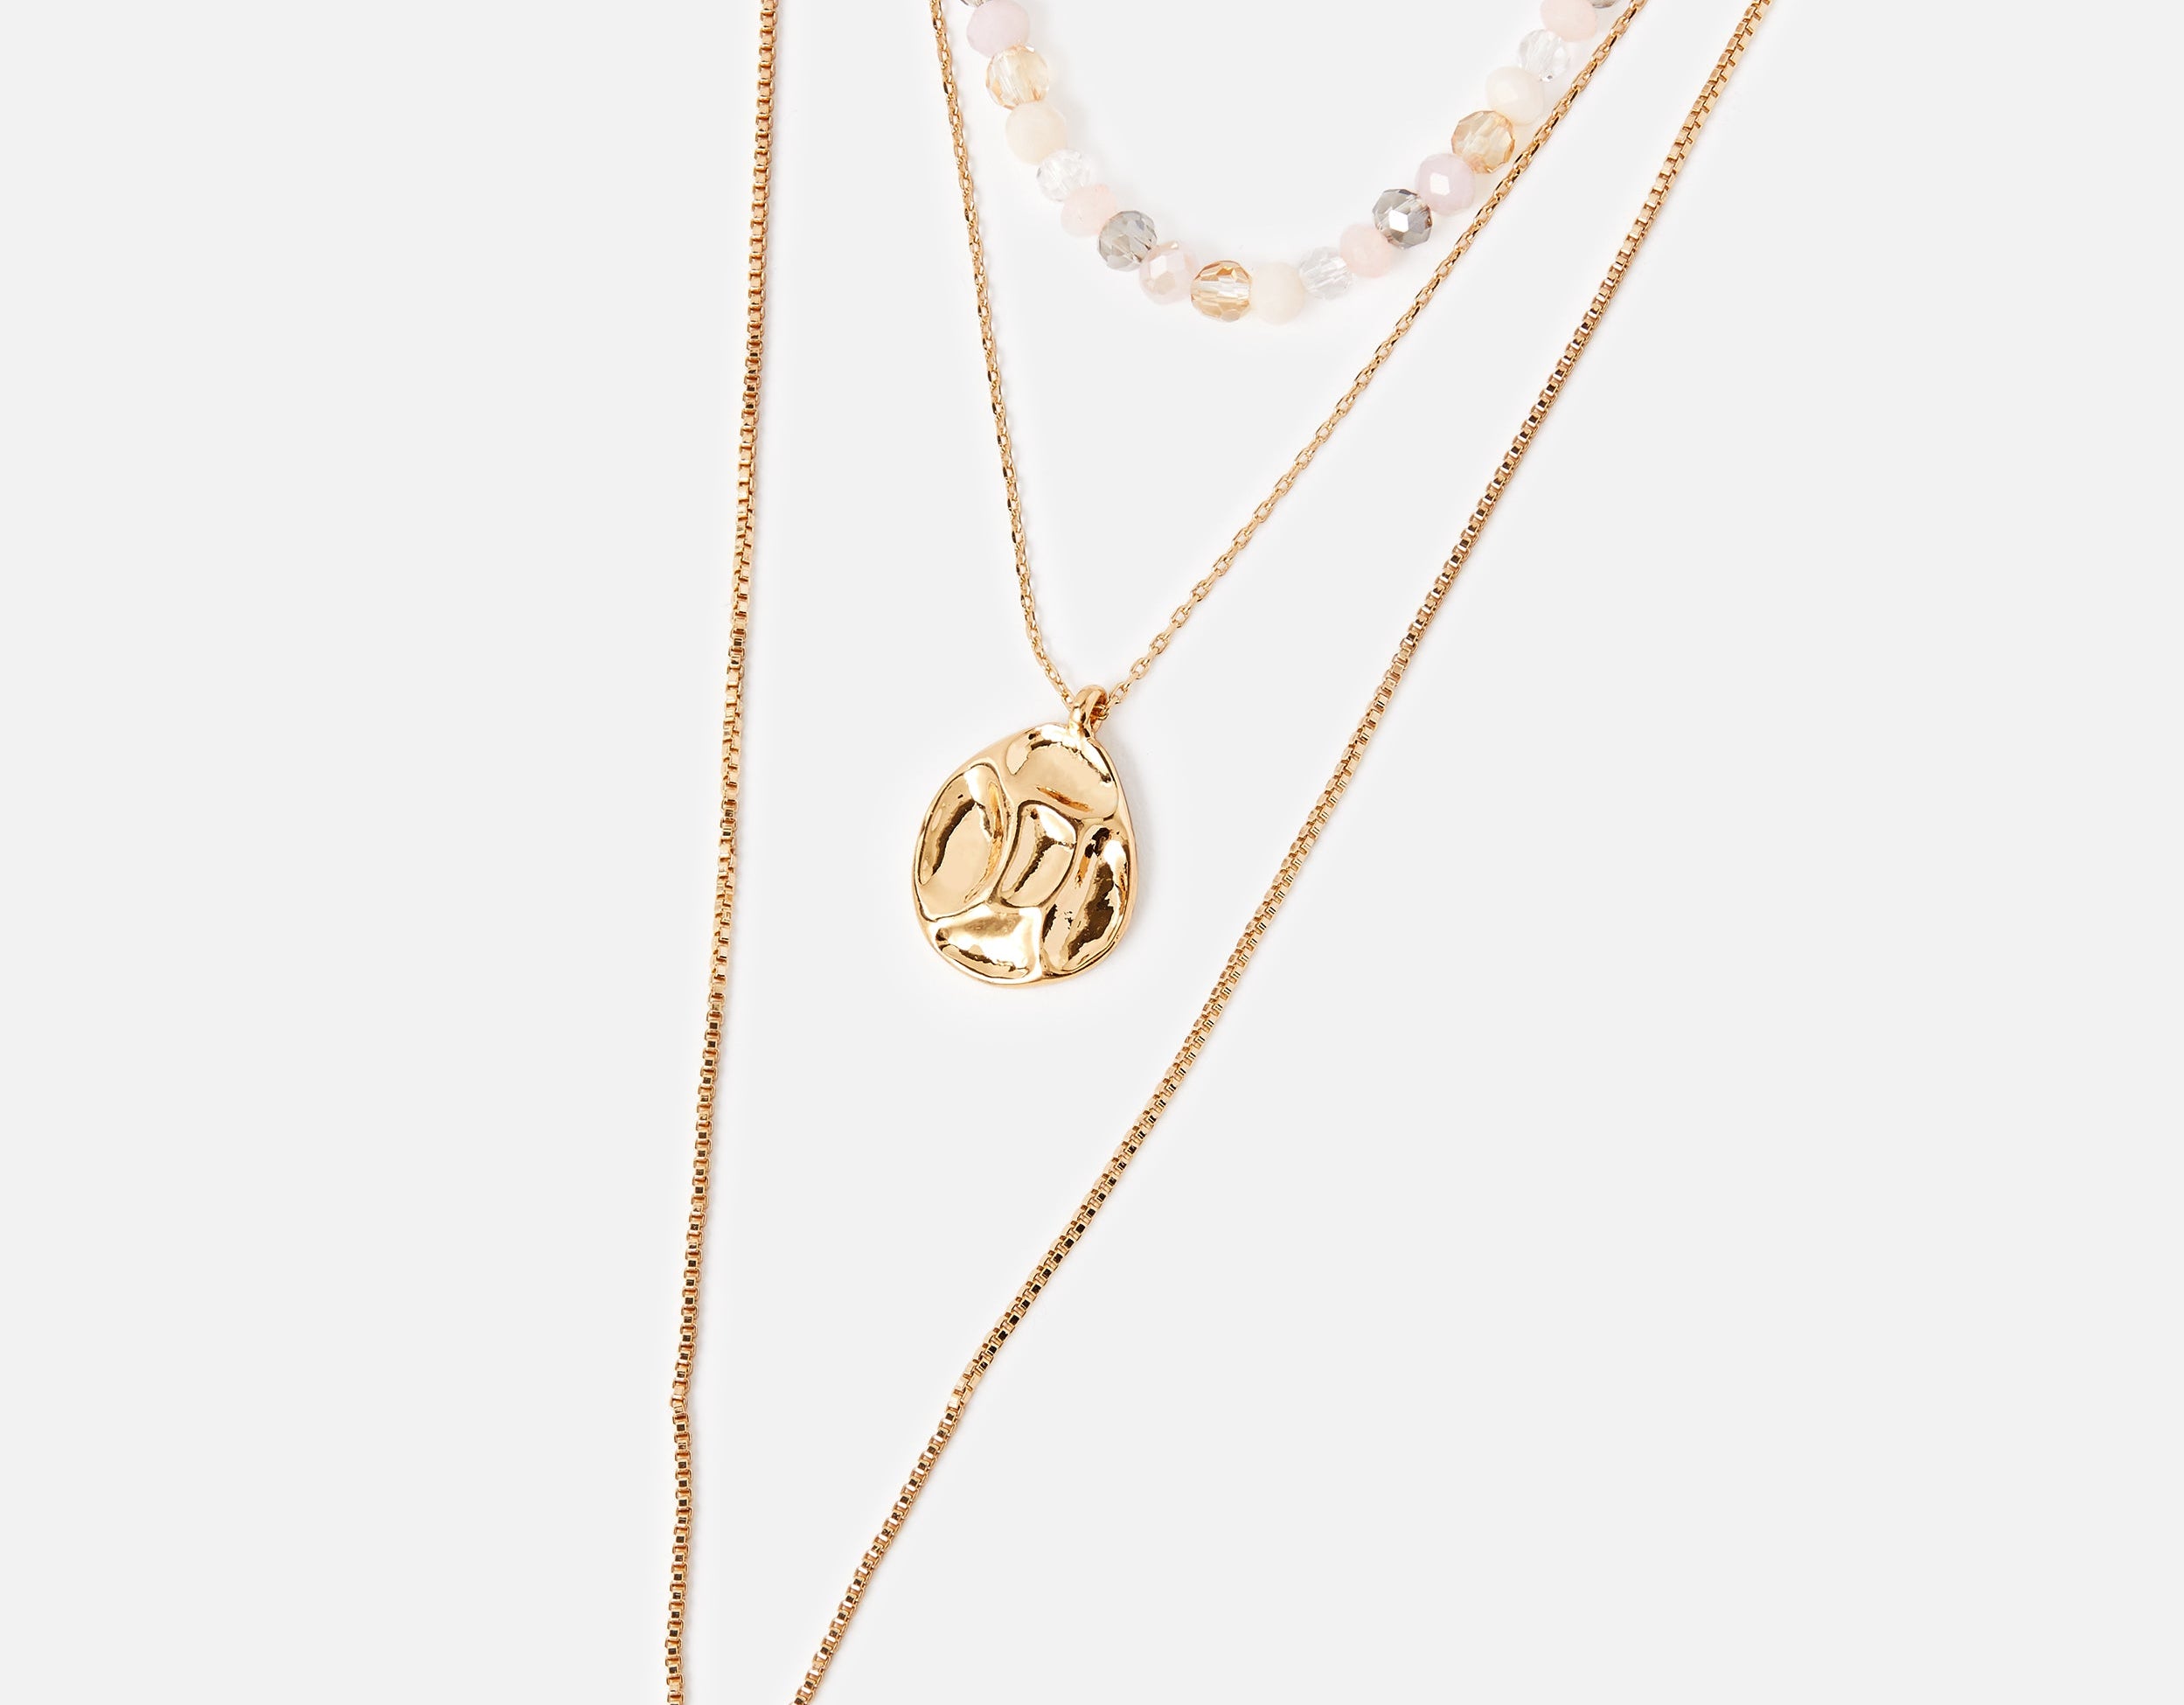 Accessorize London Stone And Coin Layered Necklace